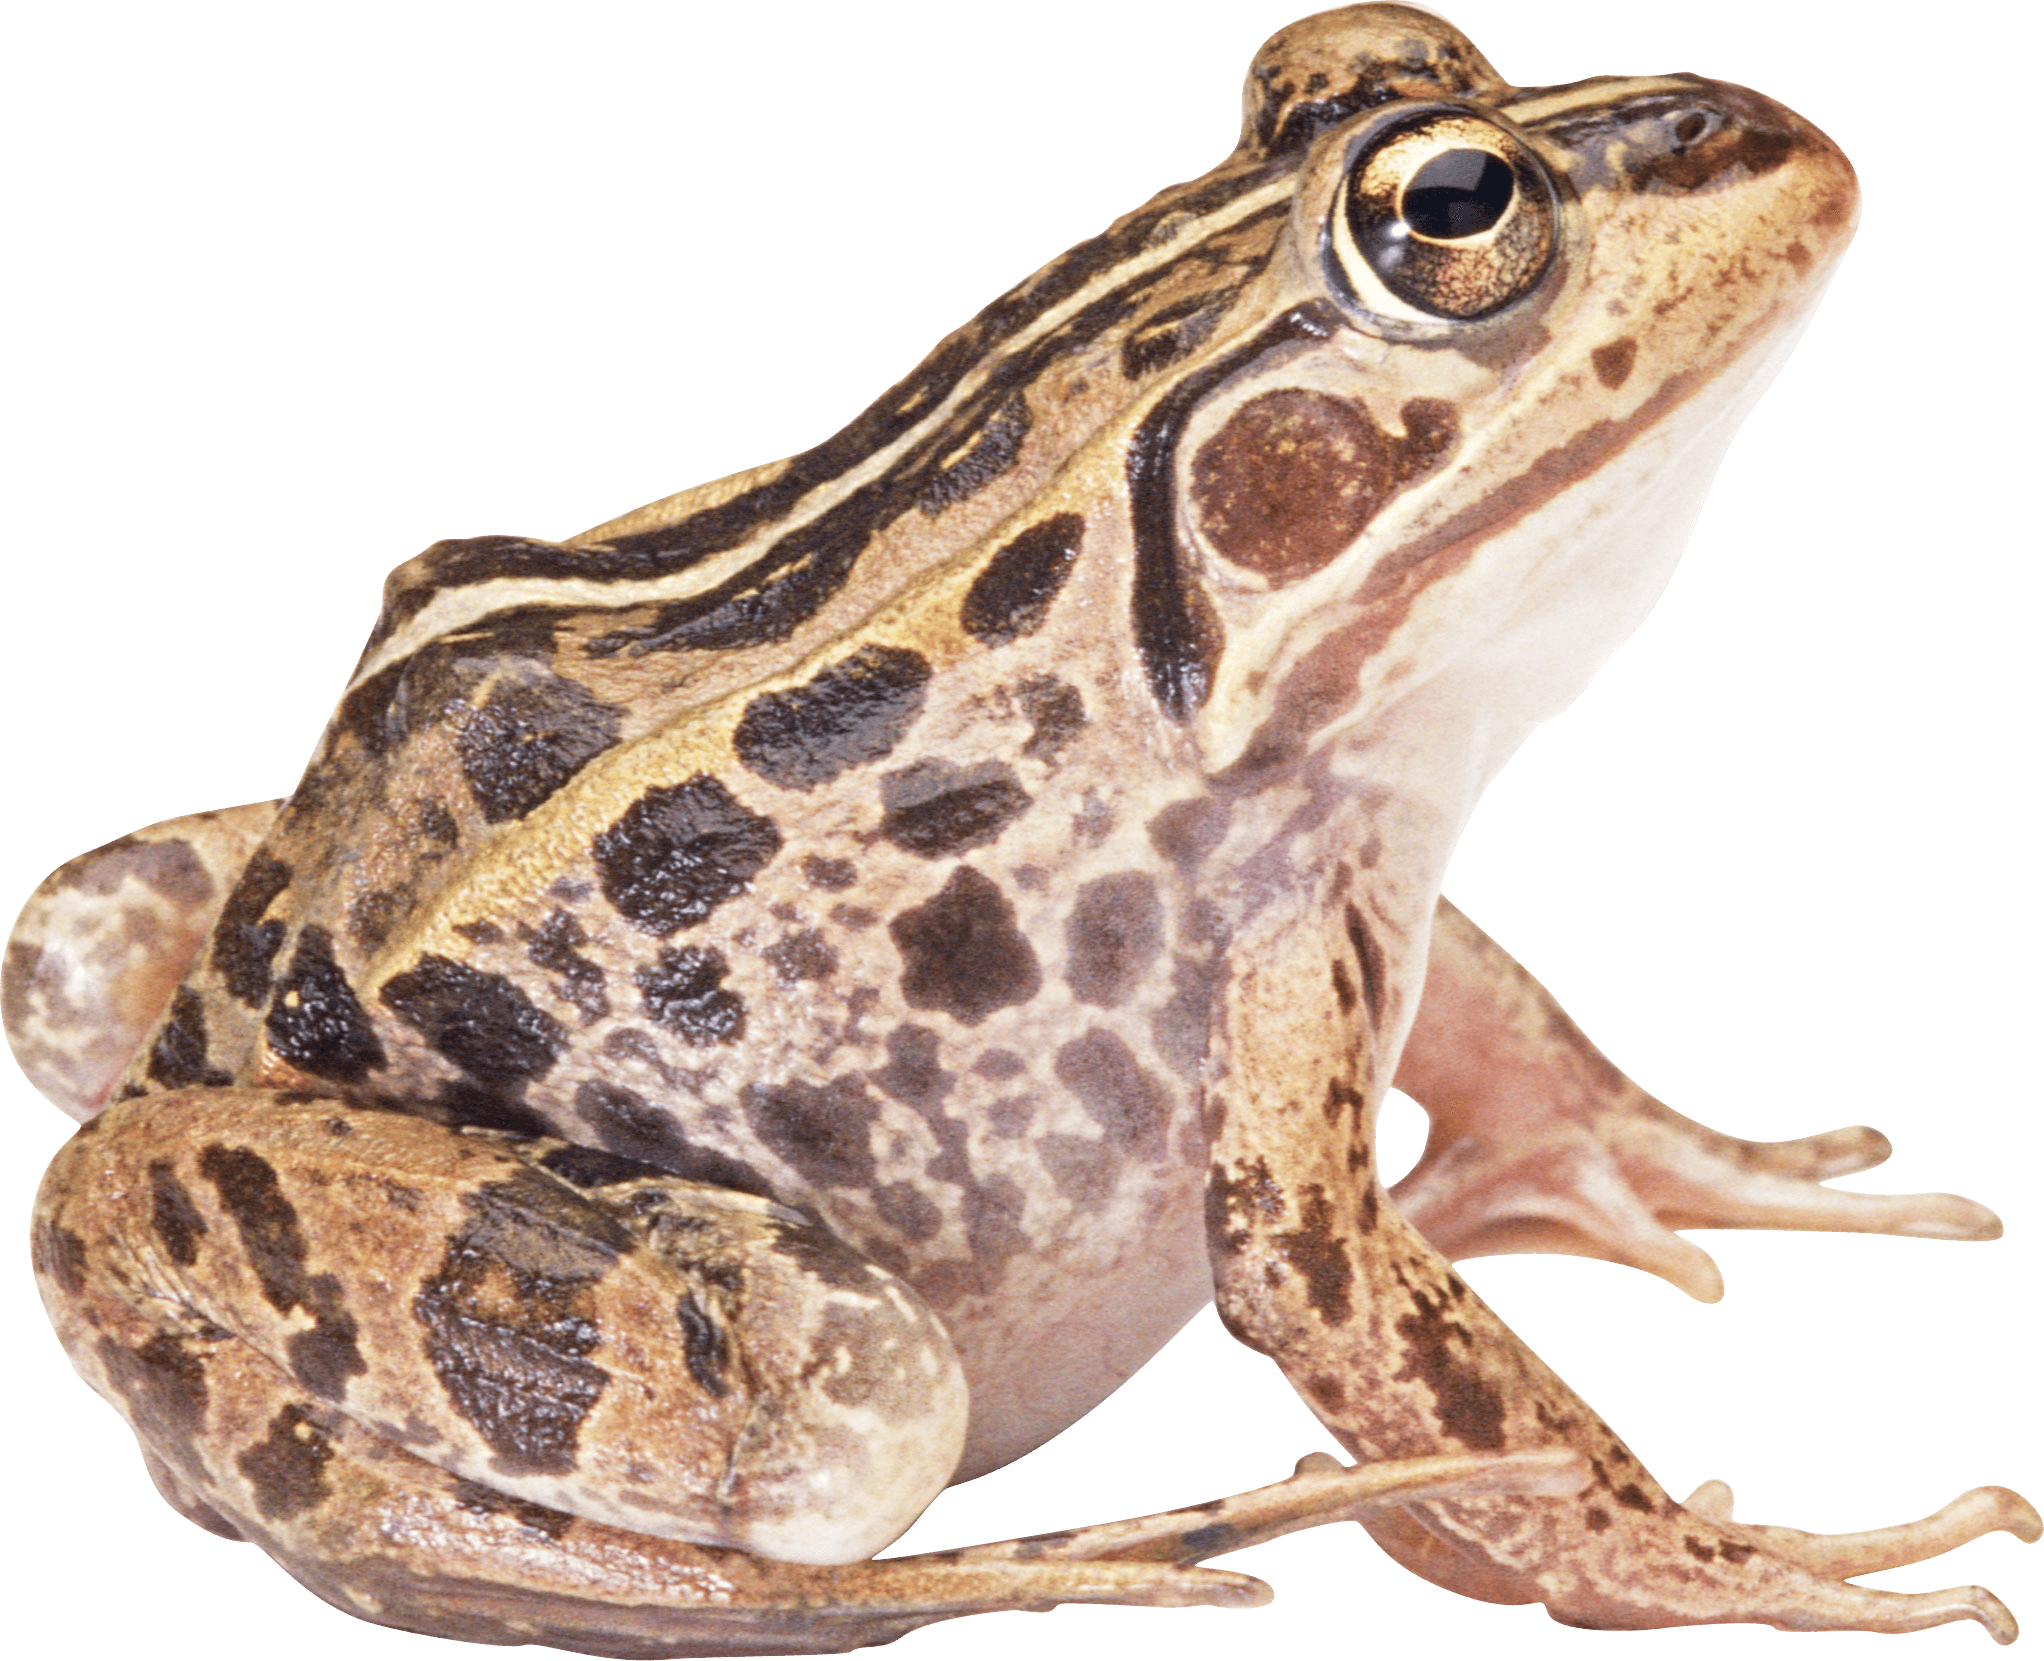 Frog PNG - 26653